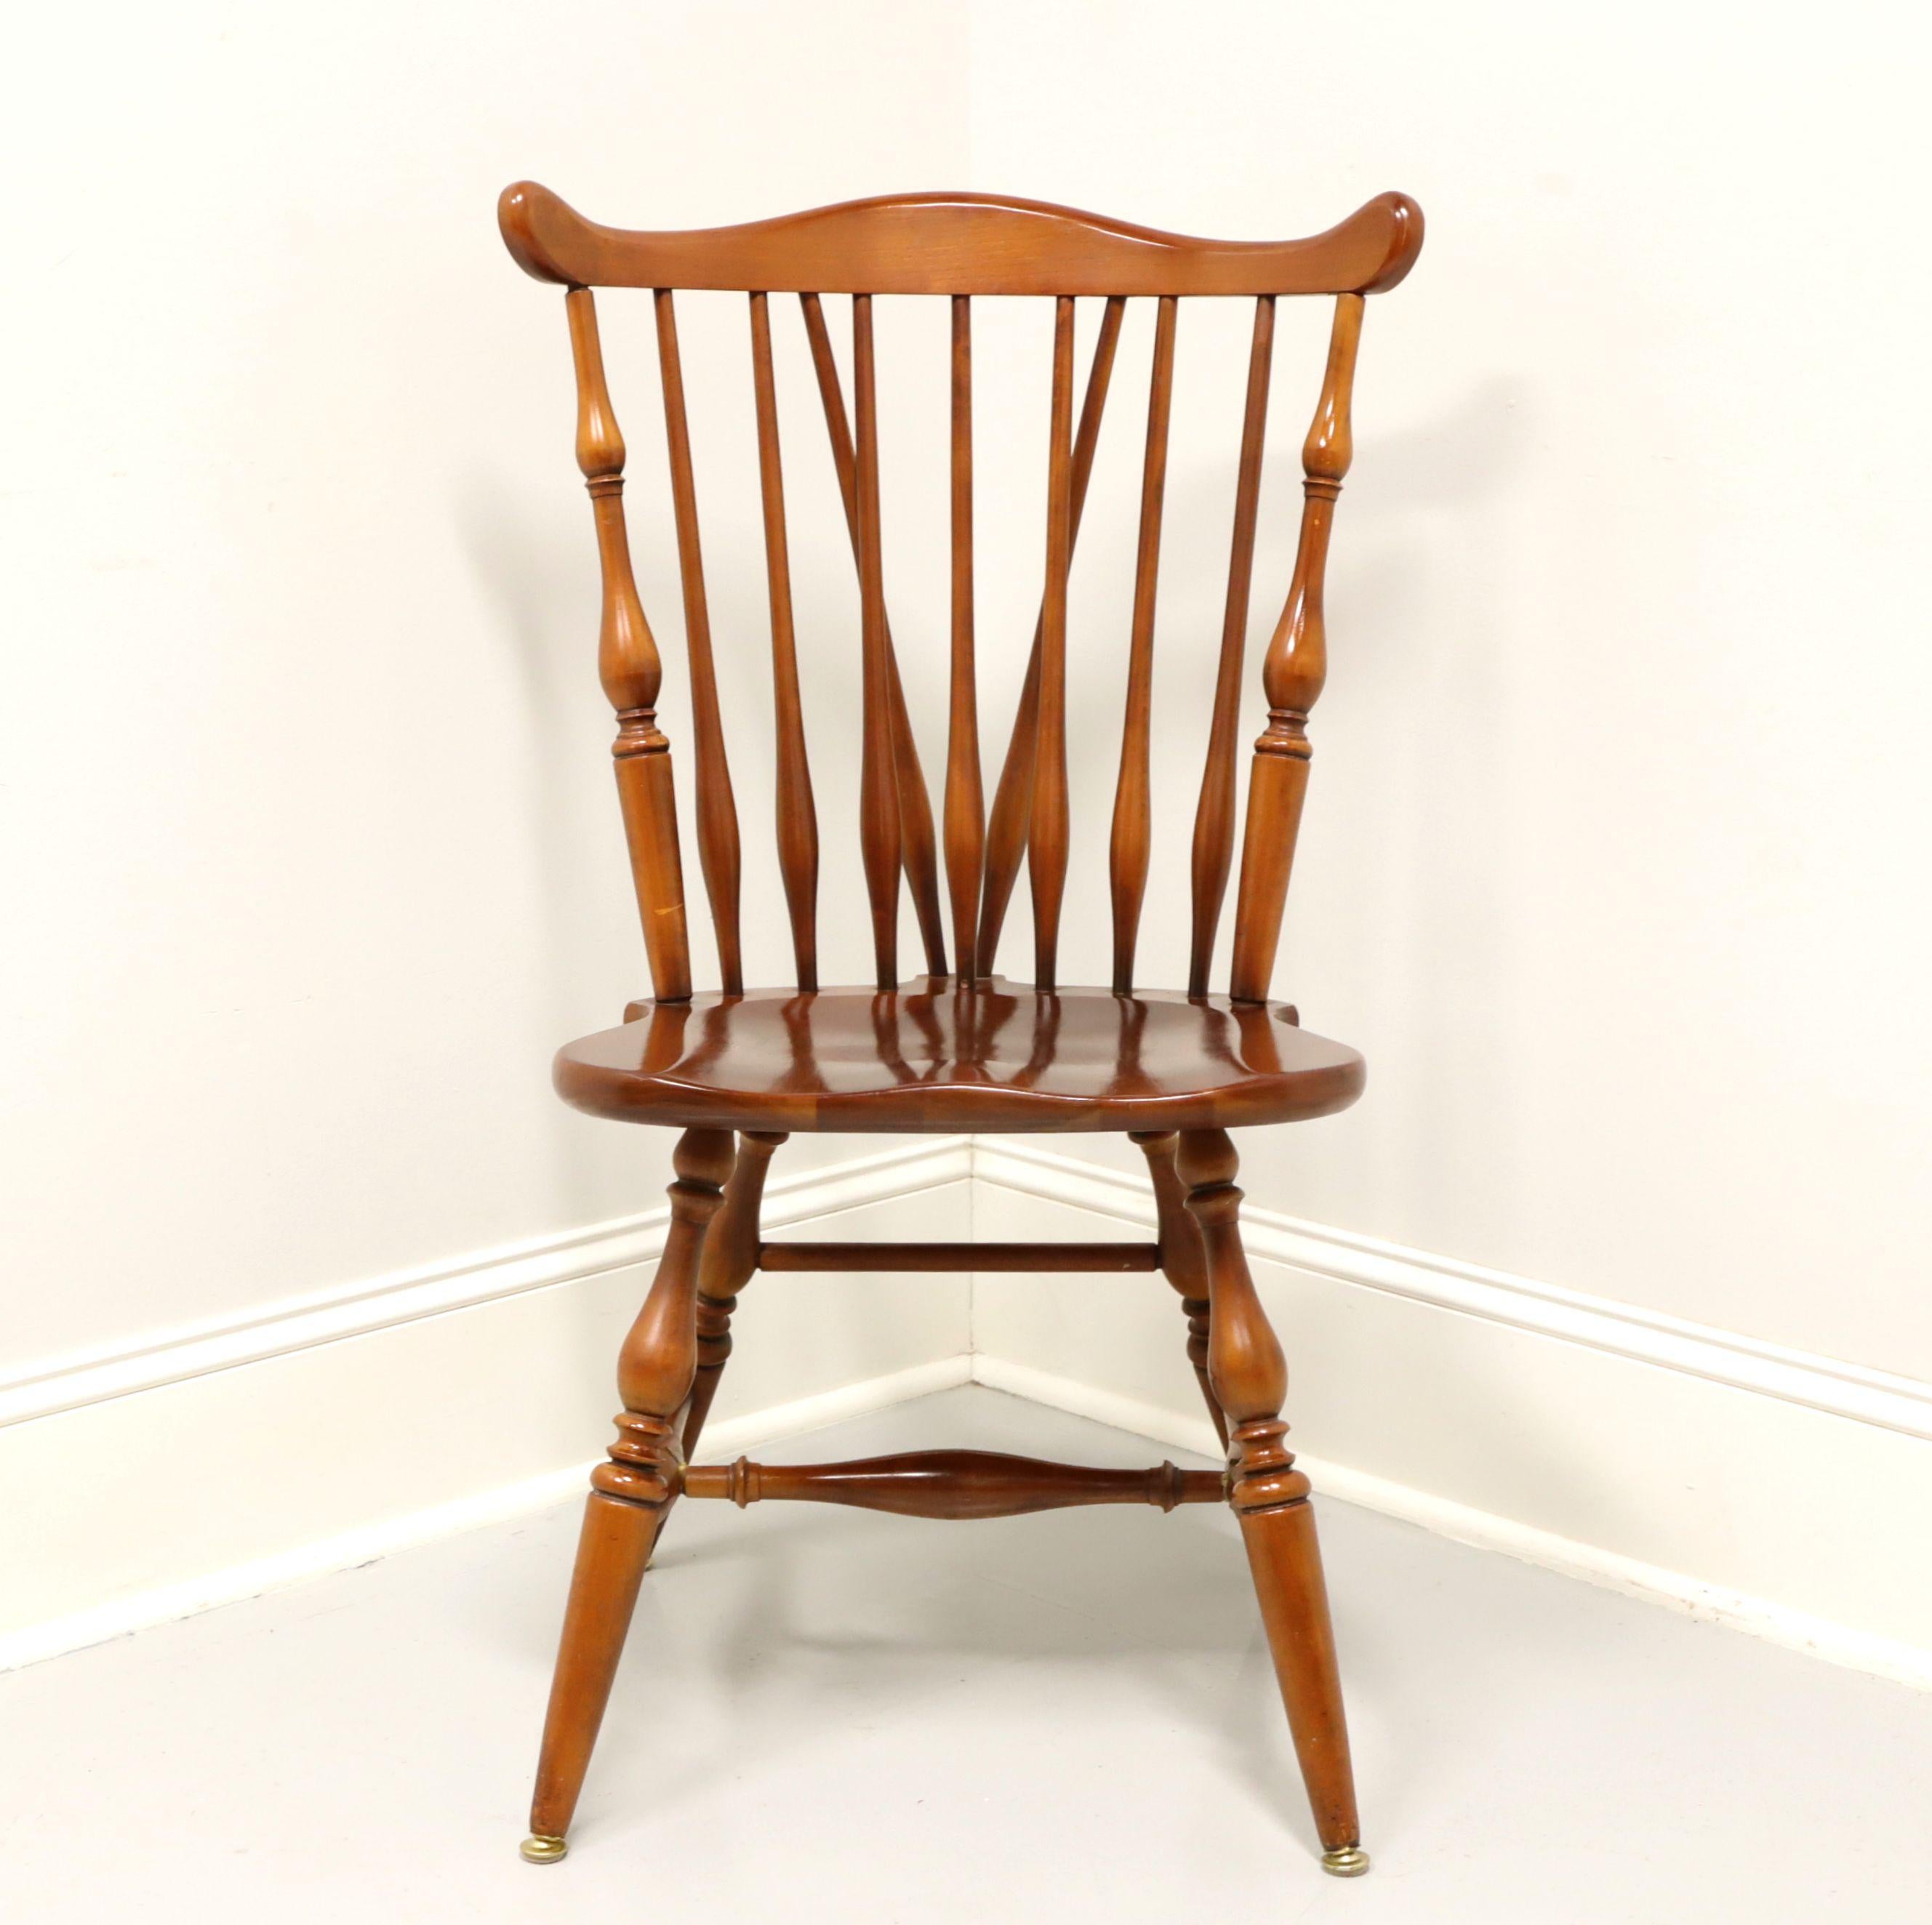 A Windsor style dining side chair by Ethan Allen, their Duxbury. Solid maple, fiddleback with turned side spindles, saddle shape seat, tail-supports with spindles, turned legs and stretchers. Made in the USA, in the mid 20th Century.

Style #: 